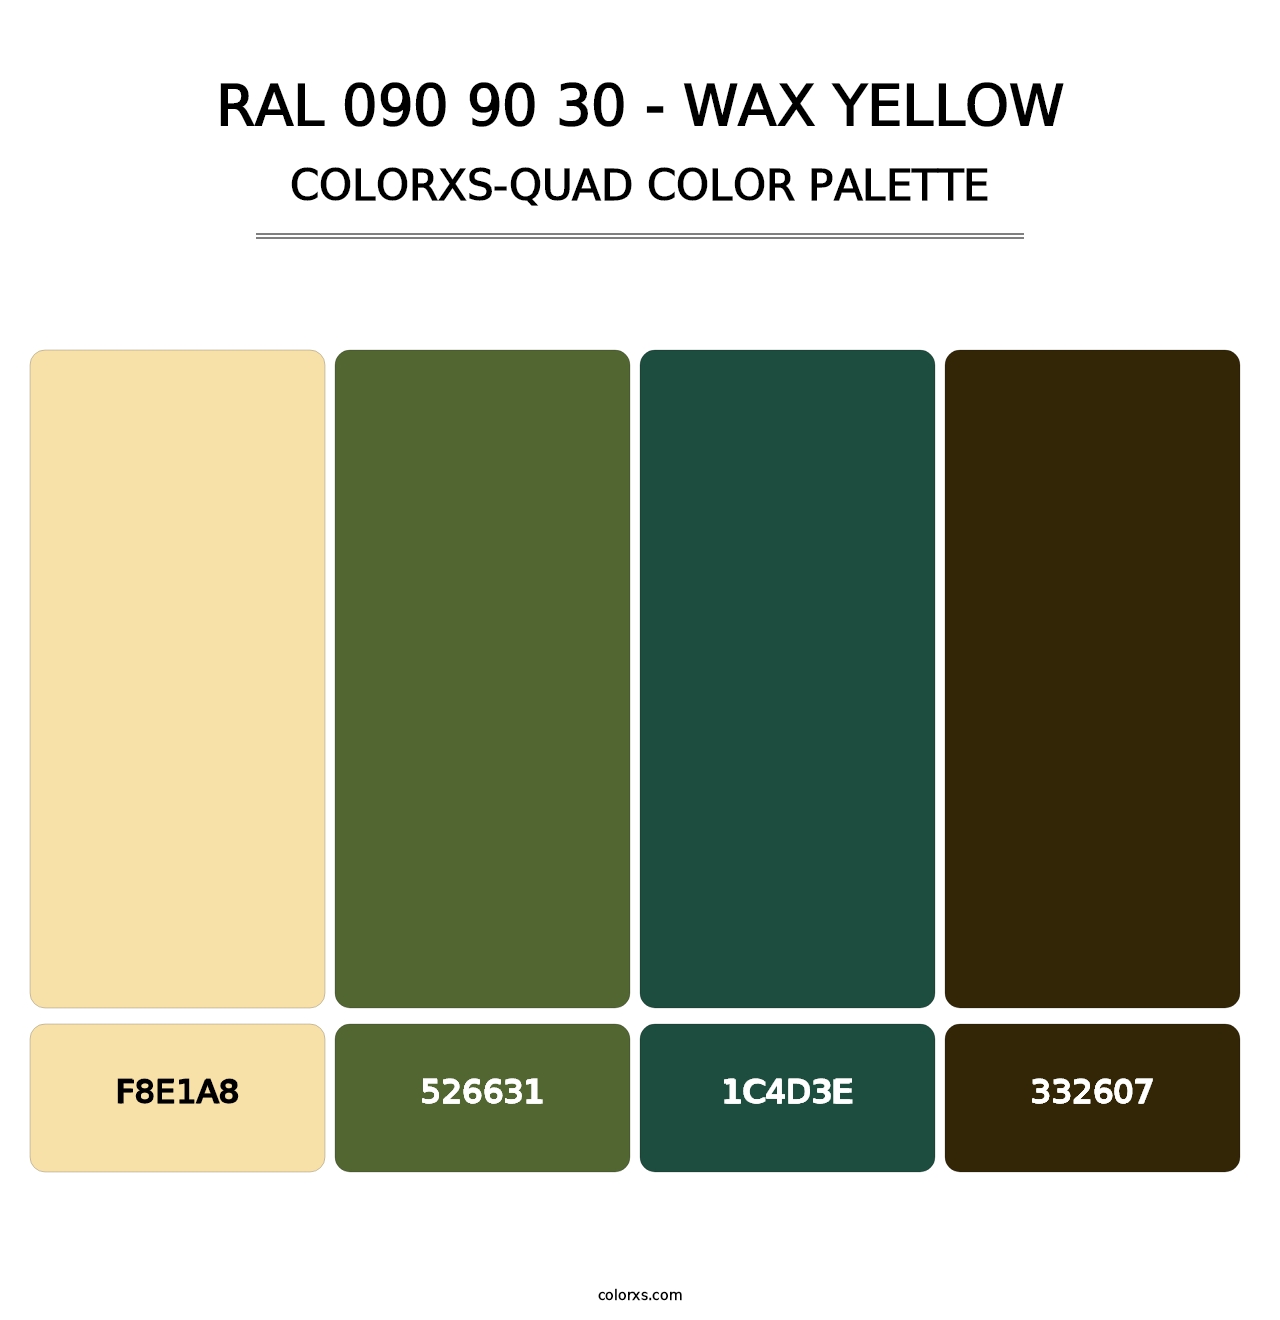 RAL 090 90 30 - Wax Yellow - Colorxs Quad Palette